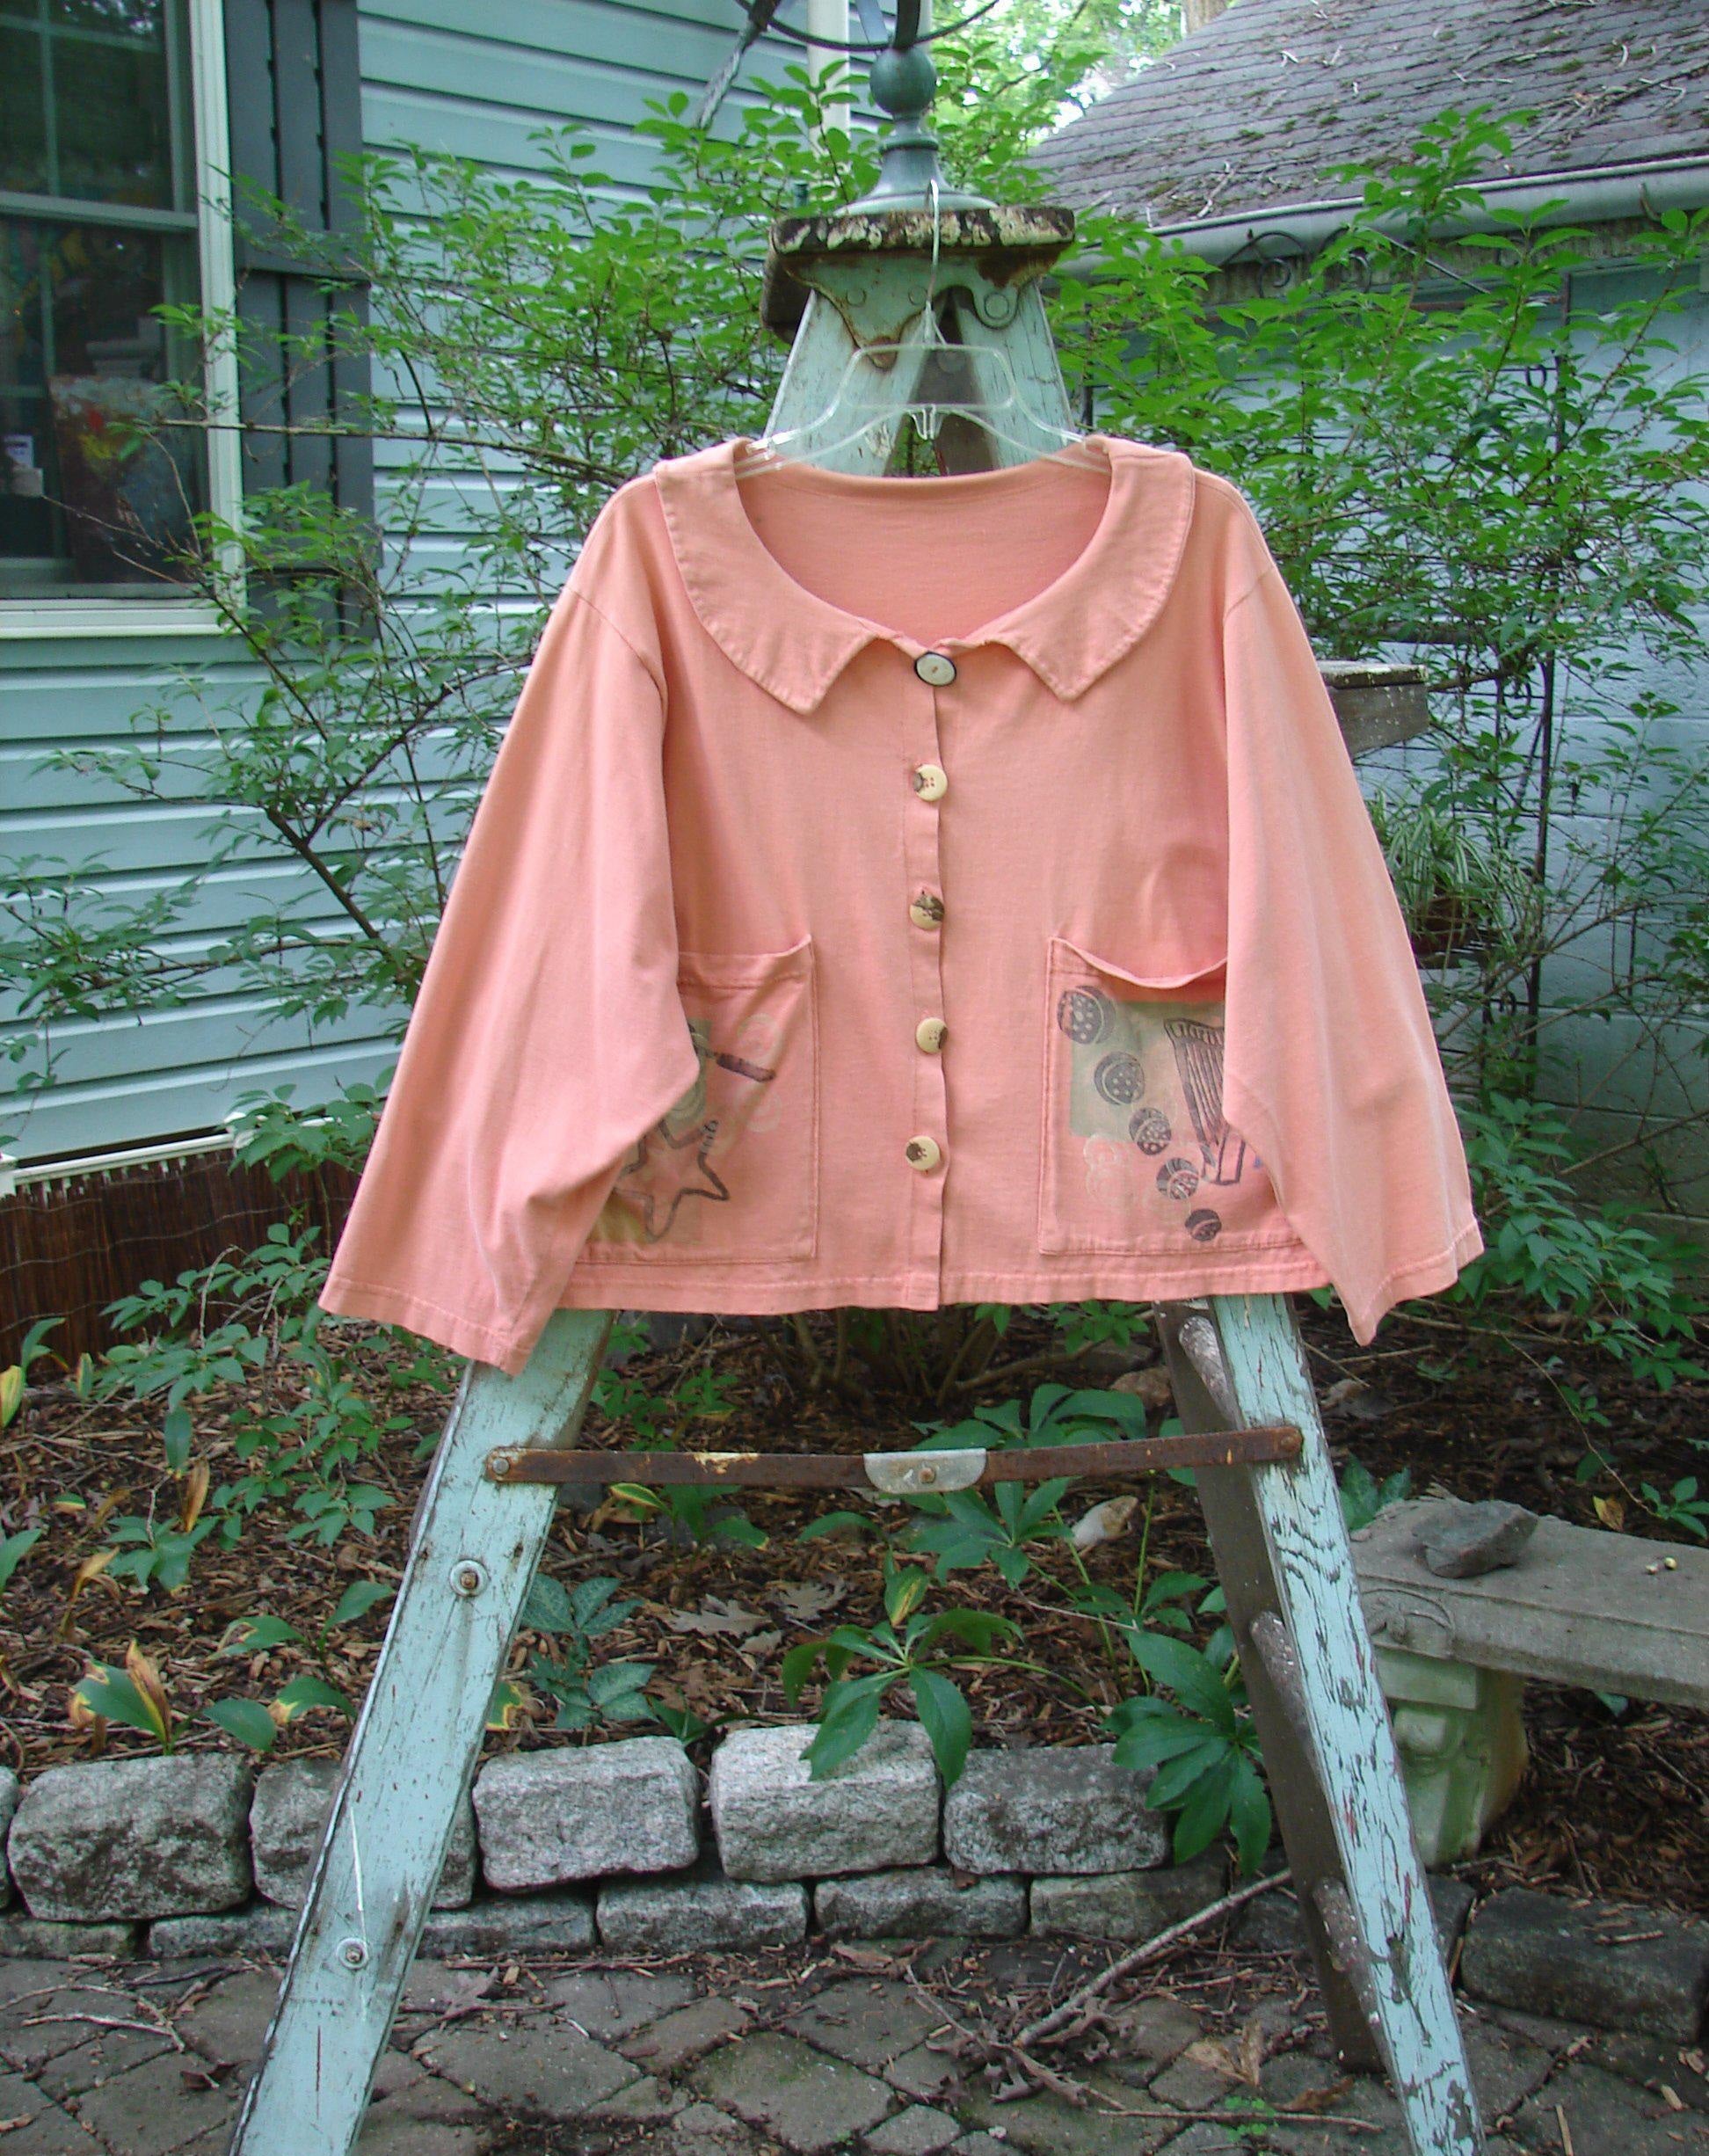 1994 Box Pocket Jacket Reef Harp Star Size 1: A pink shirt on a ladder with a pocket. Vintage Collectible from the Summer Collection of 1994. Made from Medium Weight Cotton. Features include a unique collar, big front pockets, and original buttons. Bust 50, Waist 50, Hips 50, Length 22.